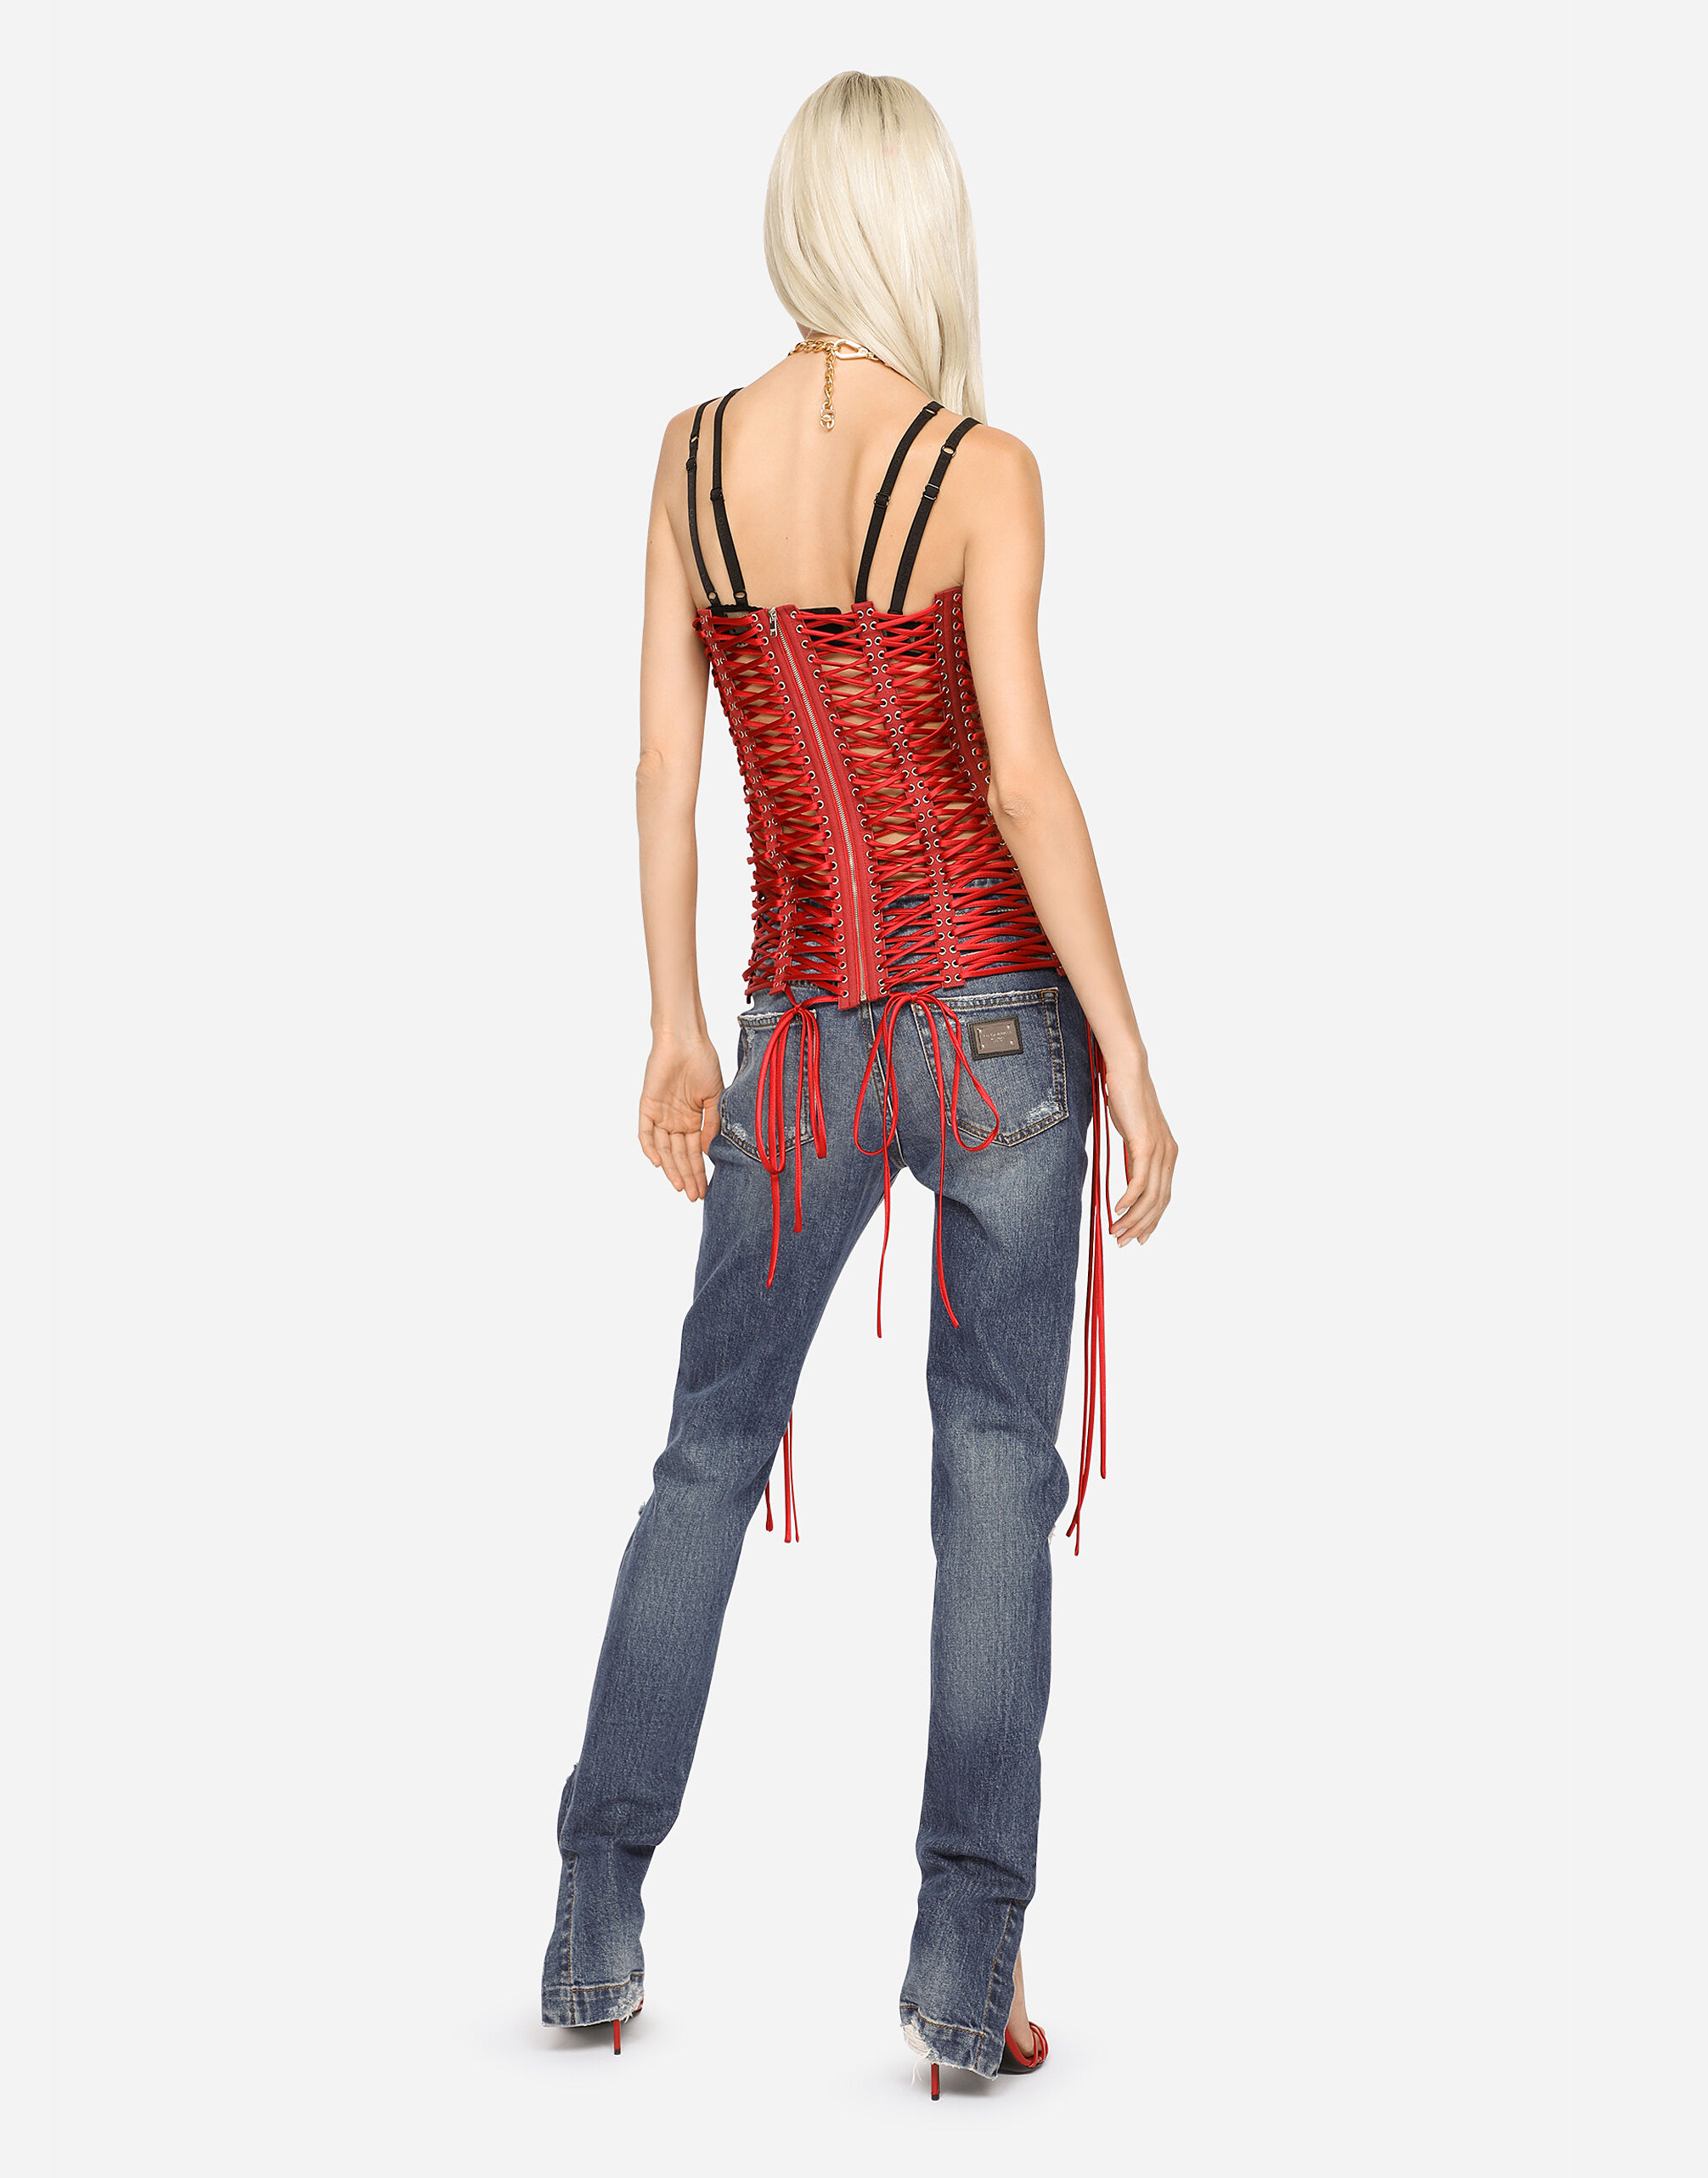 Girly jeans with ripped details in Multicolor for Women 